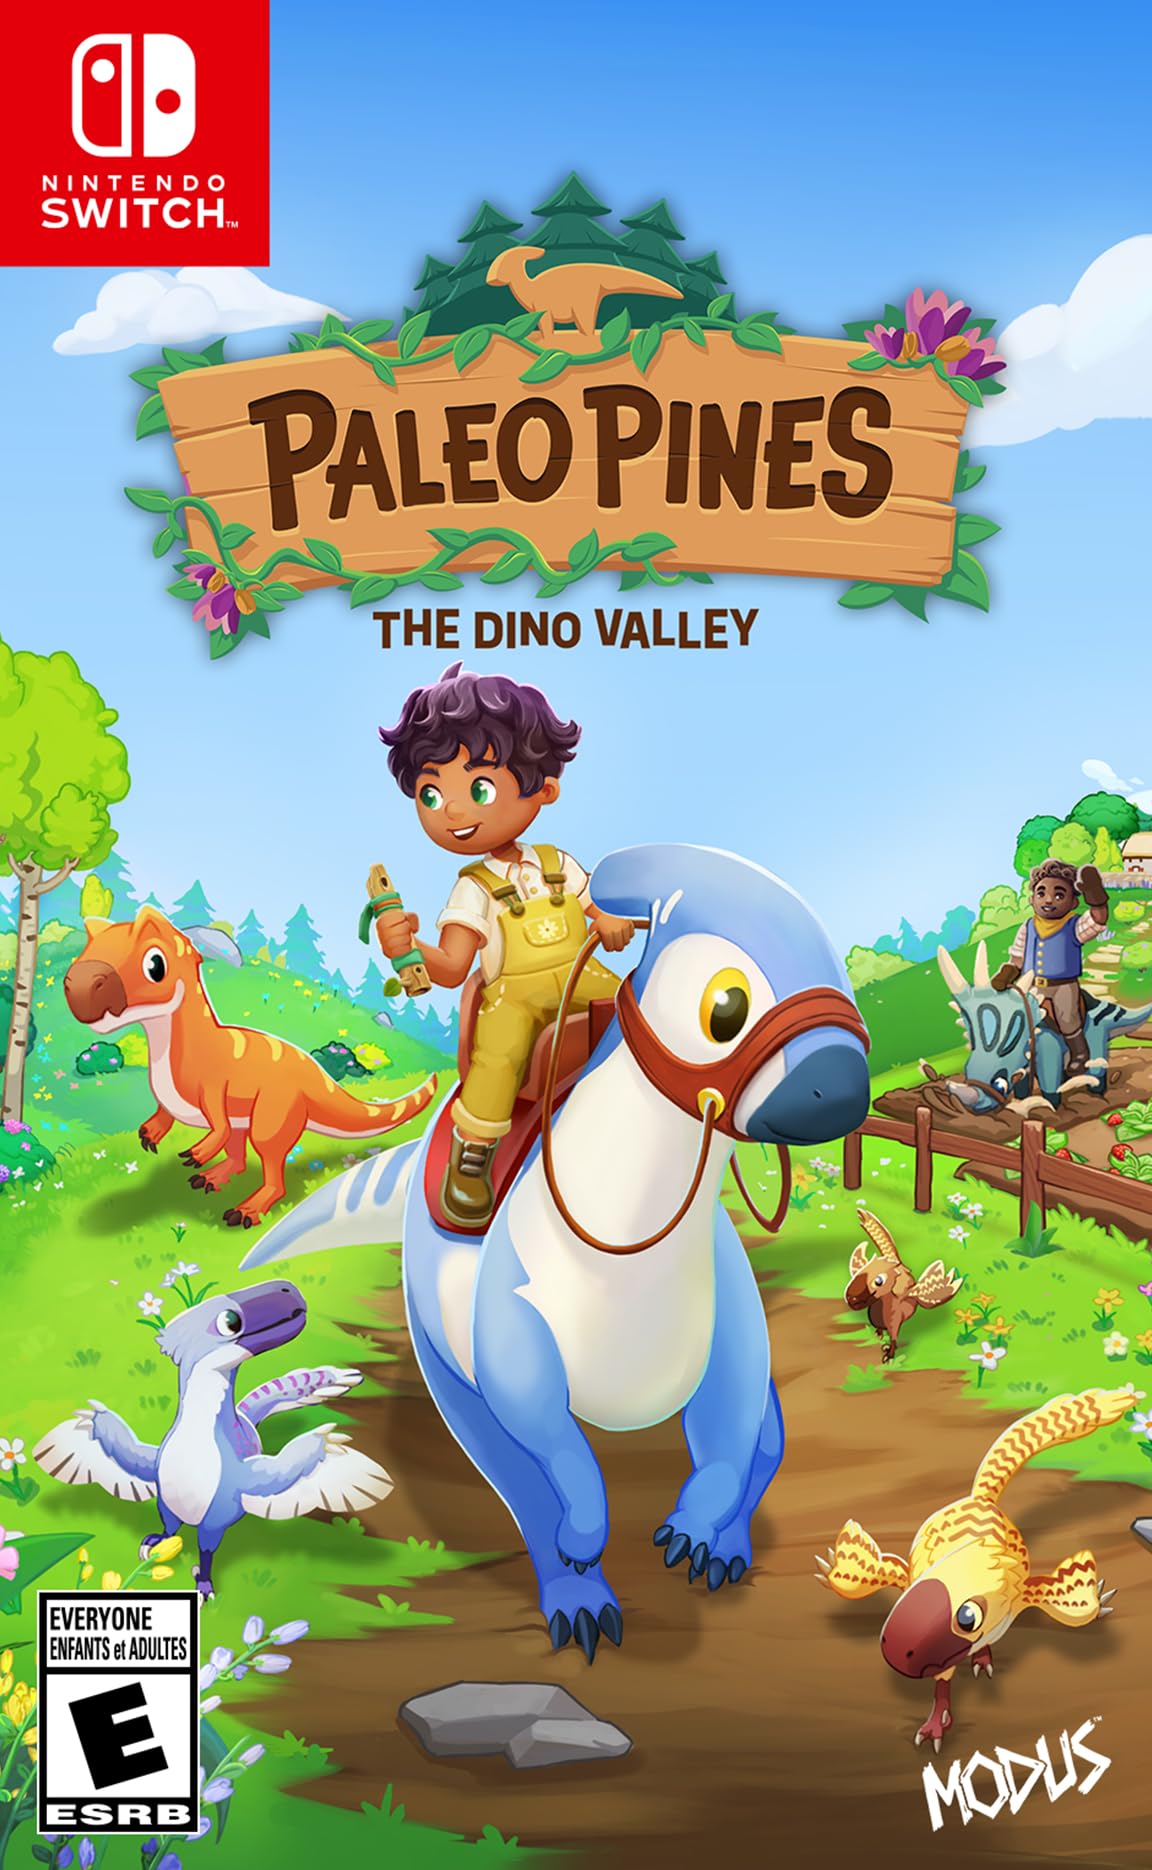 Paleo Pines: The Dino Valley (Nintendo Switch) $18.80 + Free Shipping w/ Prime or on orders over $35